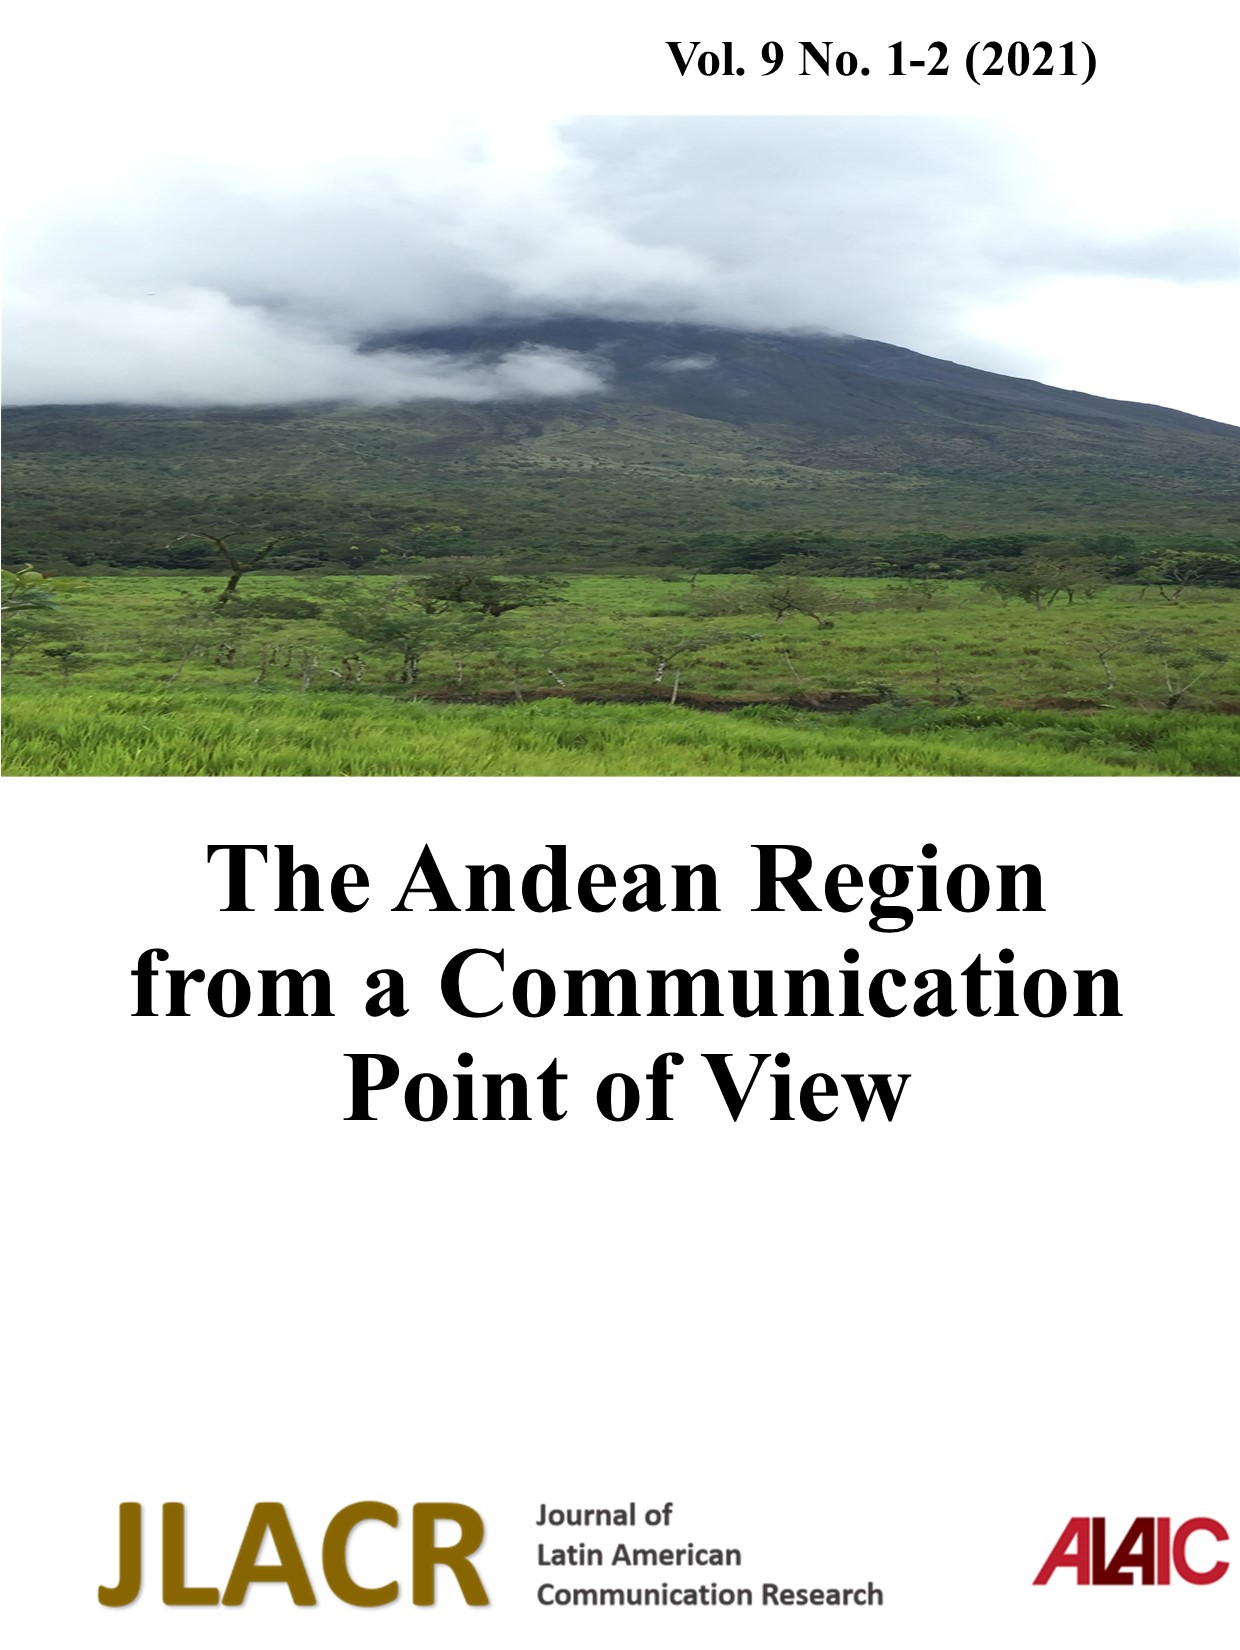 					View Vol. 9 No. 1-2 (2021): The Andean Region from a Communication Point of View
				